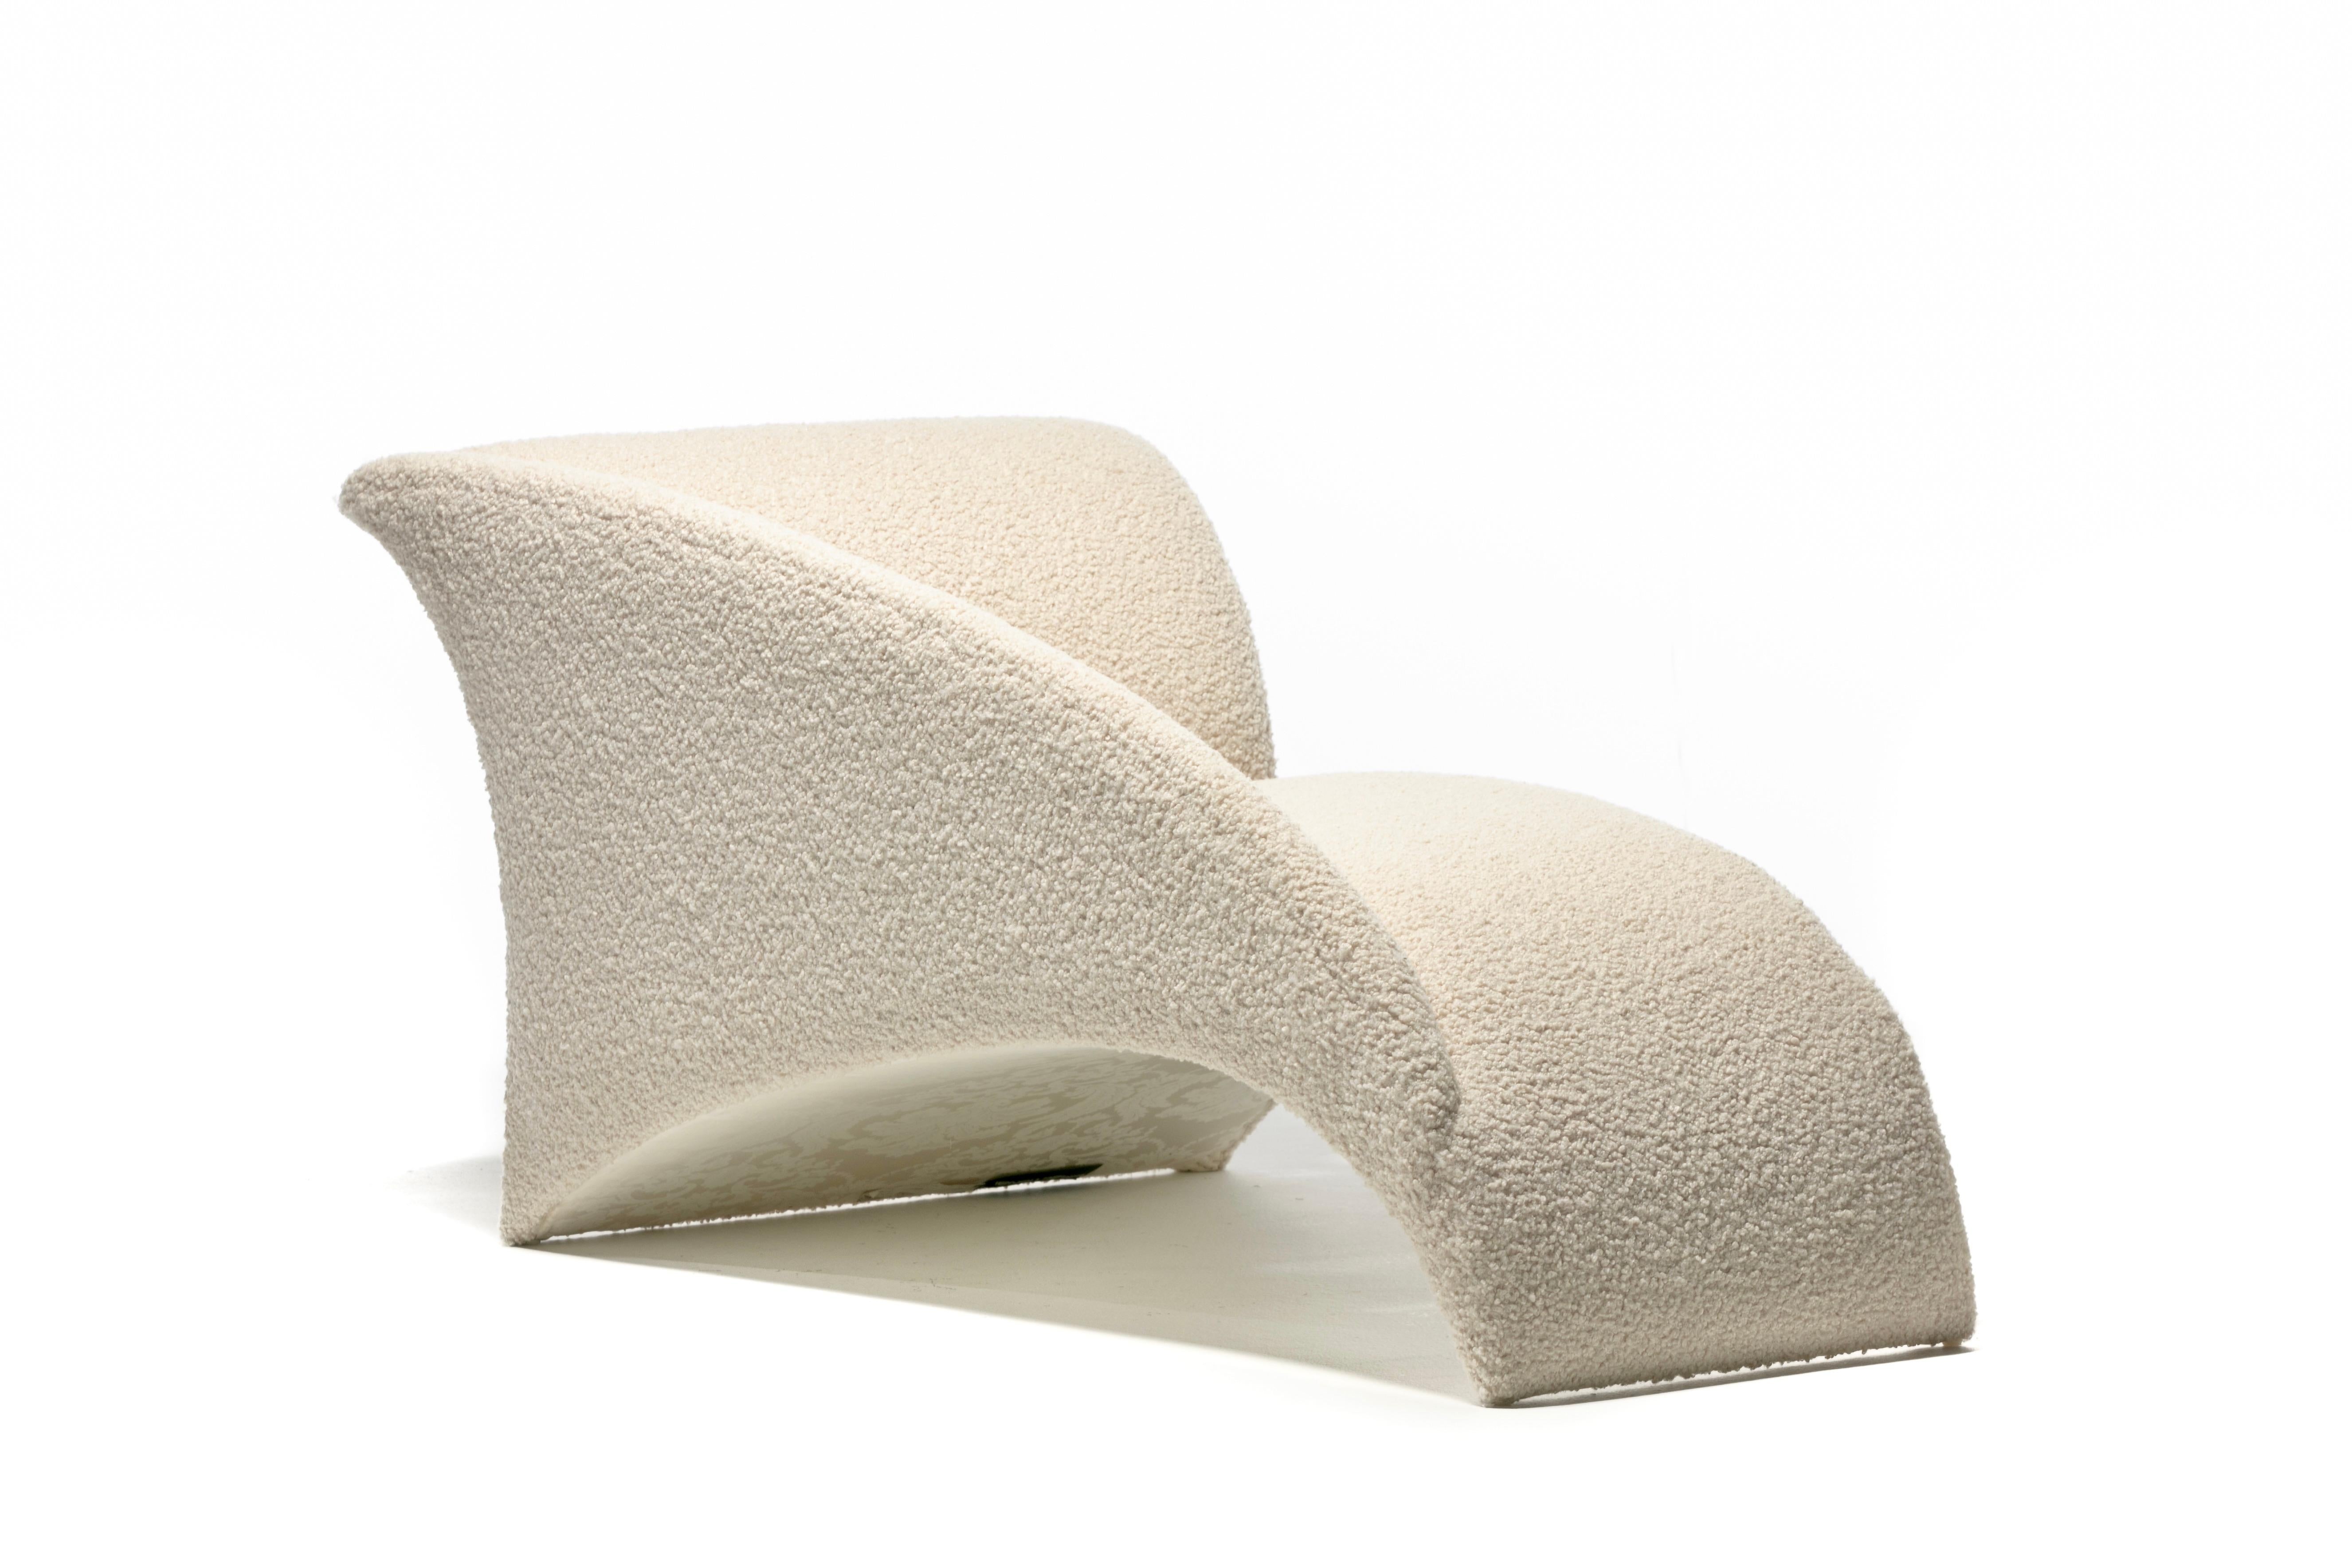 Vladimir Kagan Post Modern Marilyn Chaise Lounge in Ivory White Bouclé c. 1986 For Sale 1